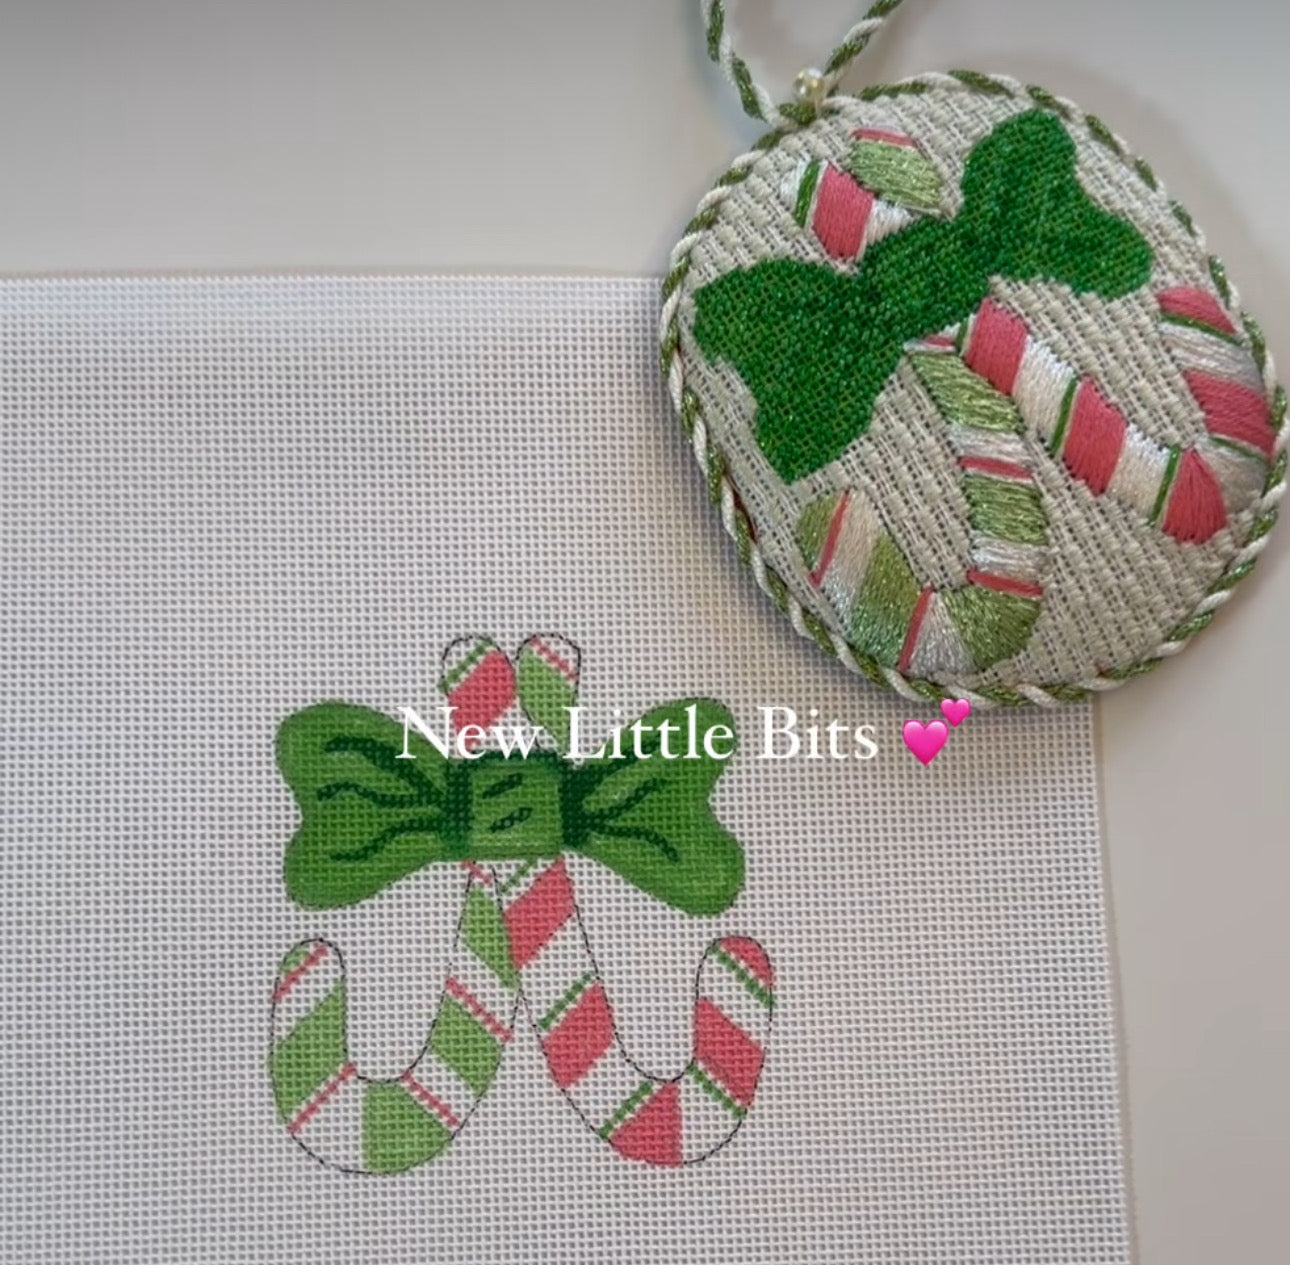 Patricia Sone 108-L Pink Candy Canes - includes Stitch Guide